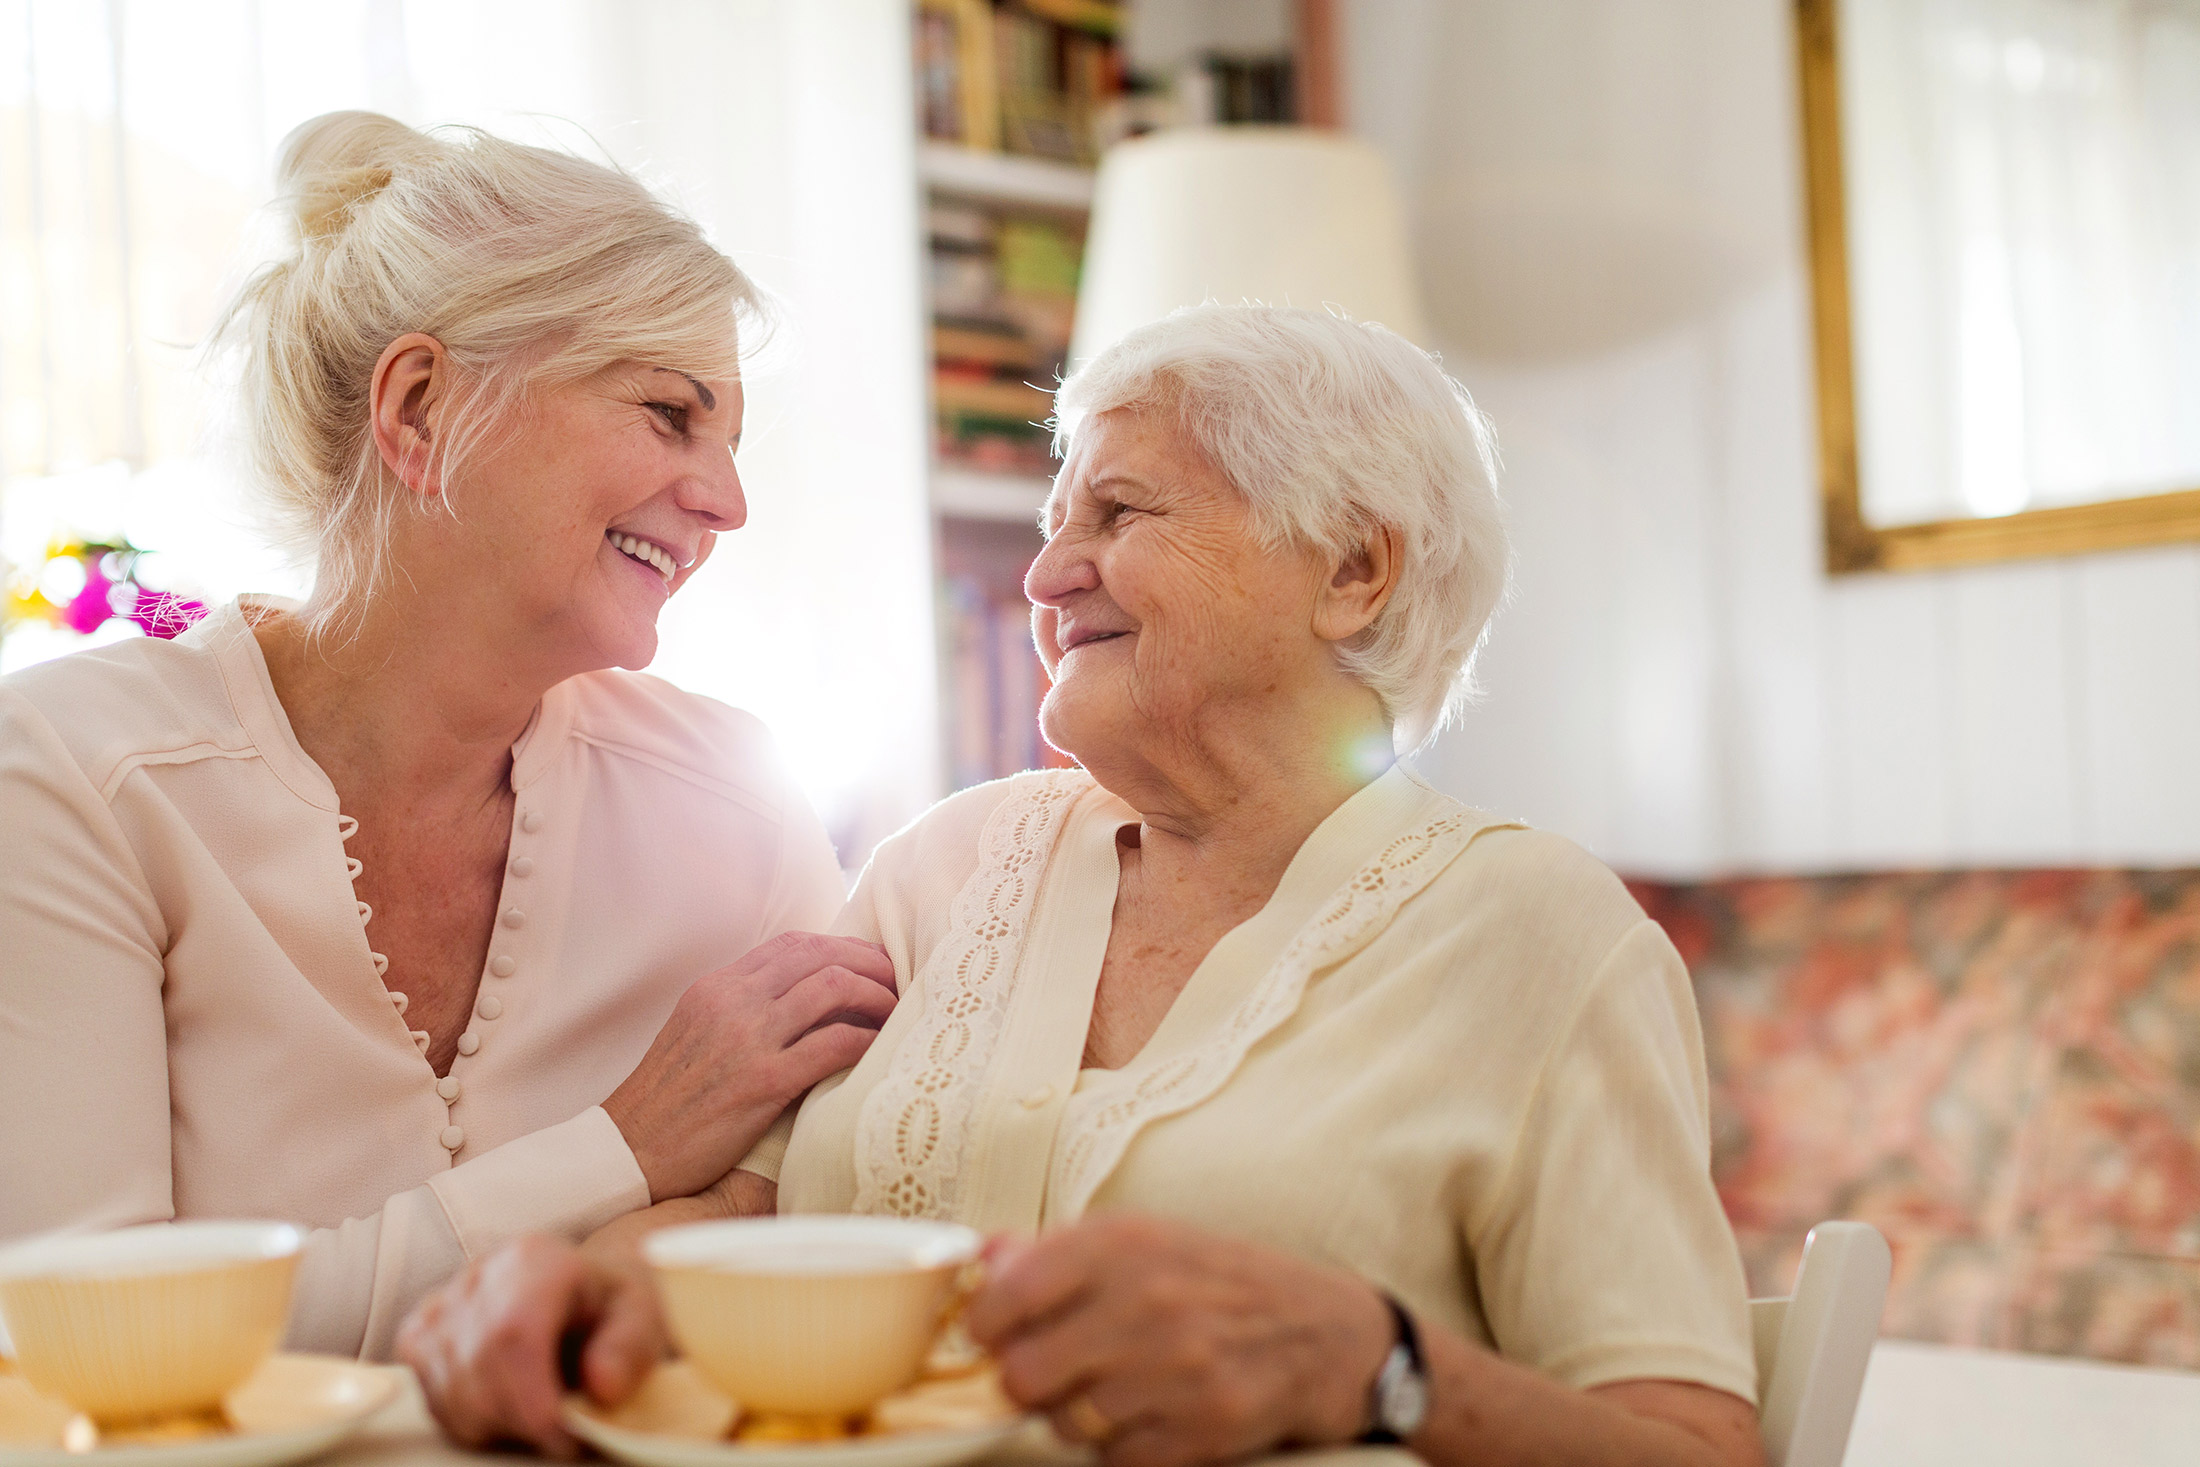 Two women smiling at each other with coffee mugs